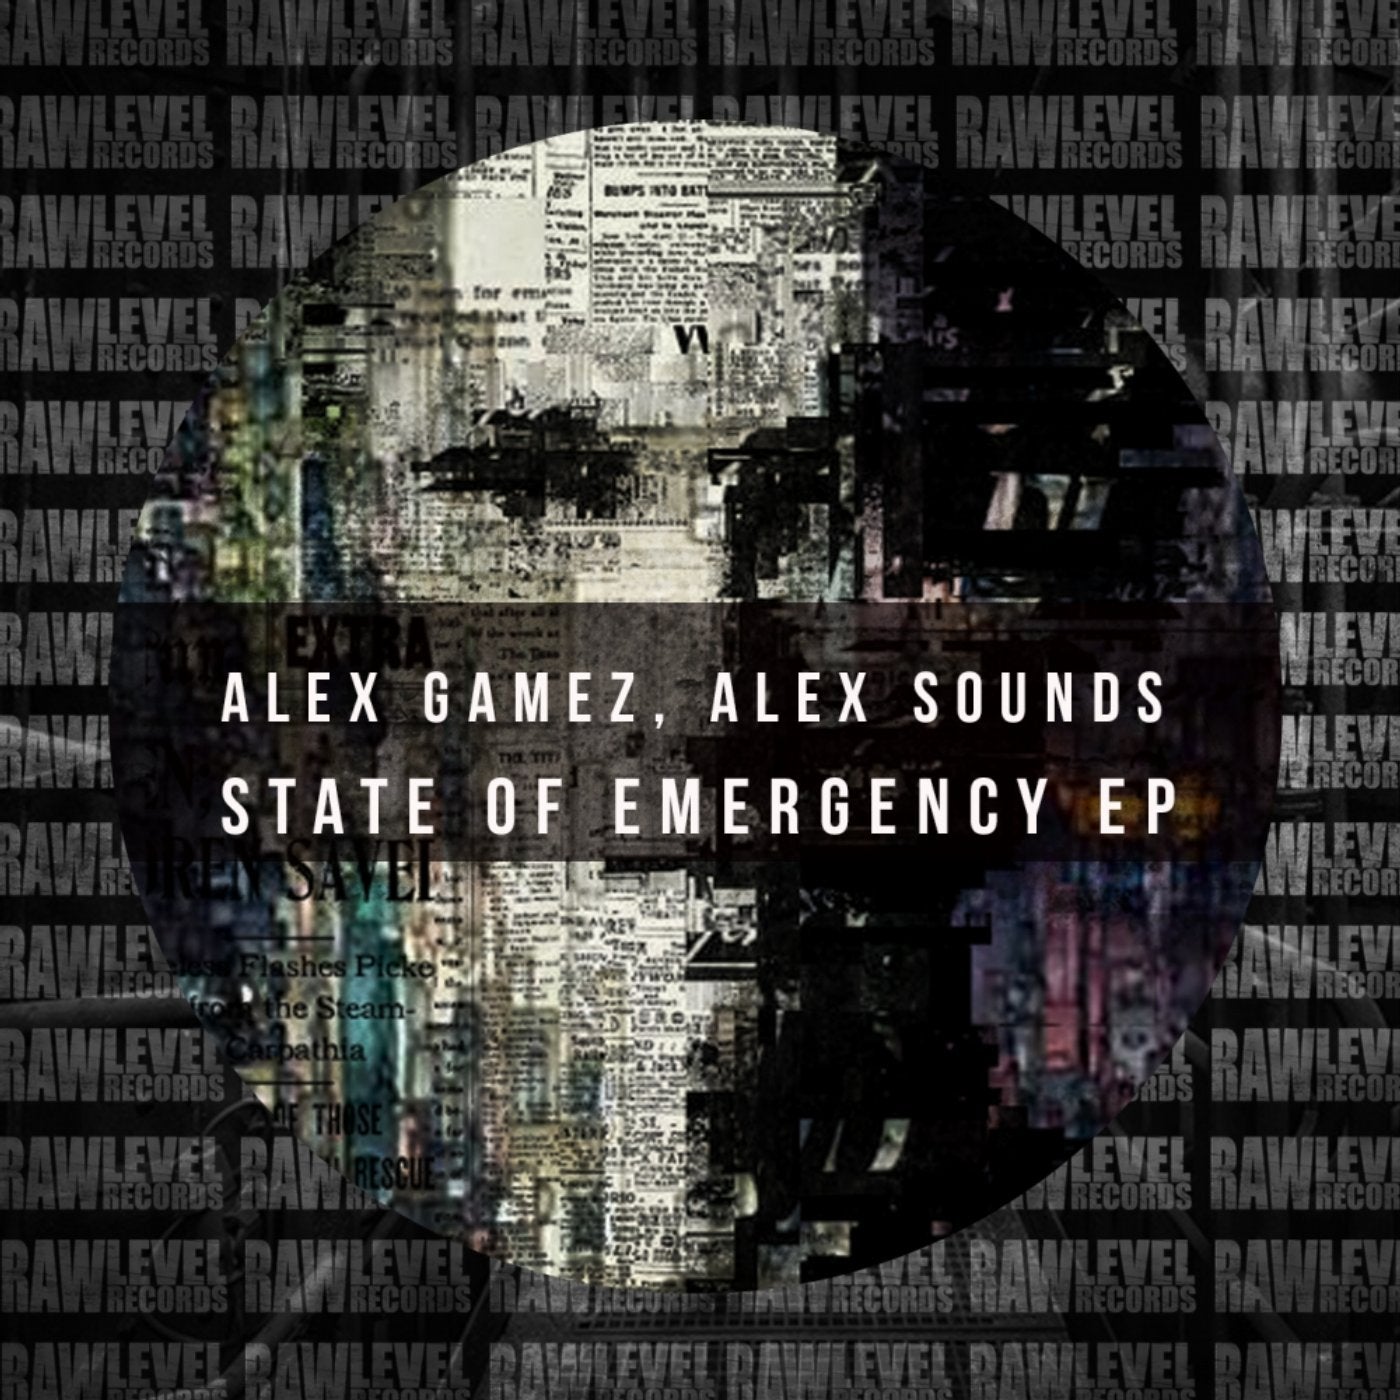 State of Emergency Ep